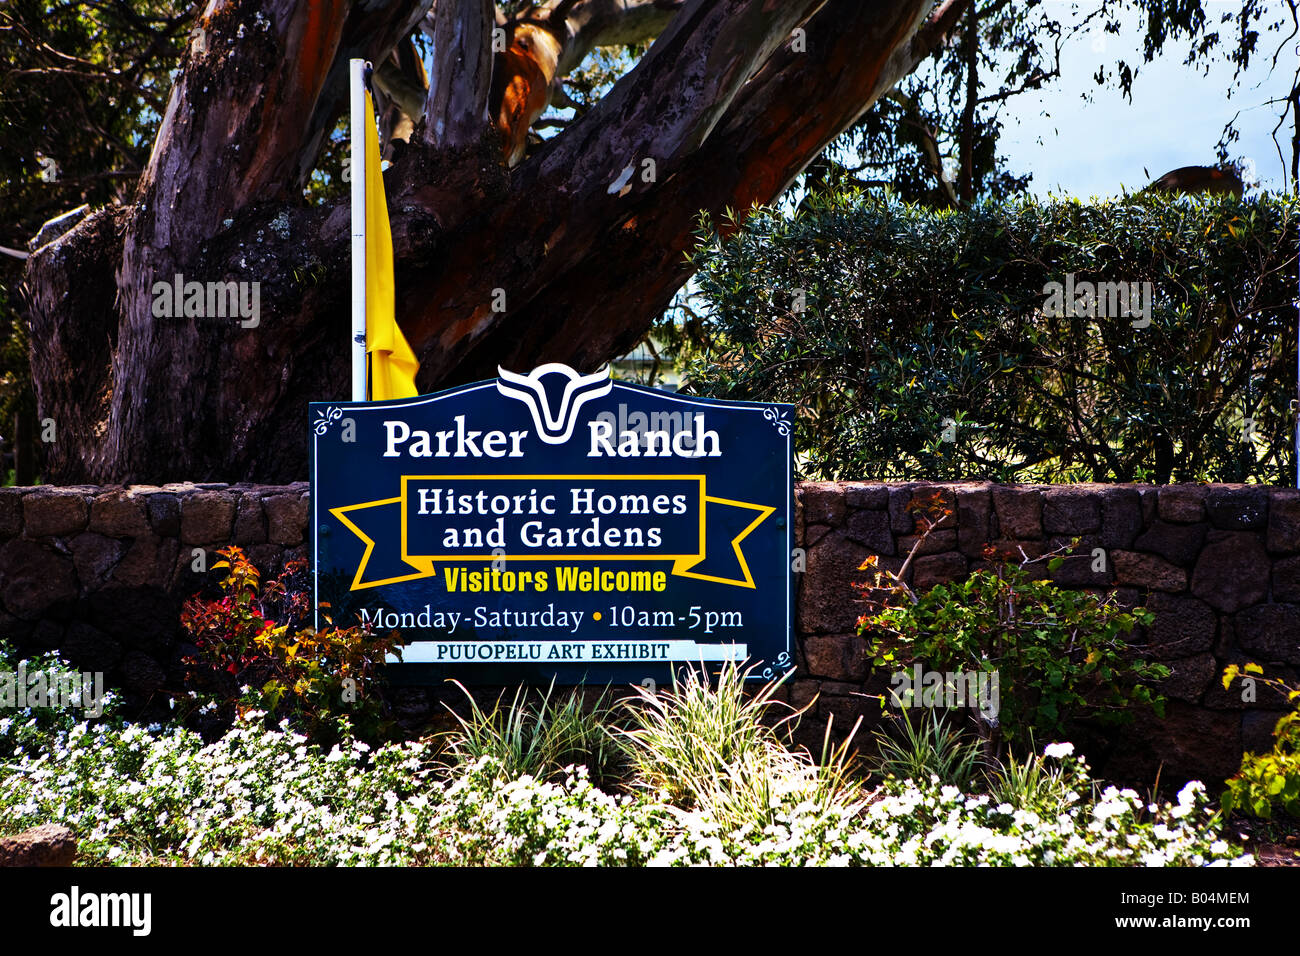 Image of the welcome sign at the end of the driveway for the Parker Ranch in Waimea Hawaii Stock Photo